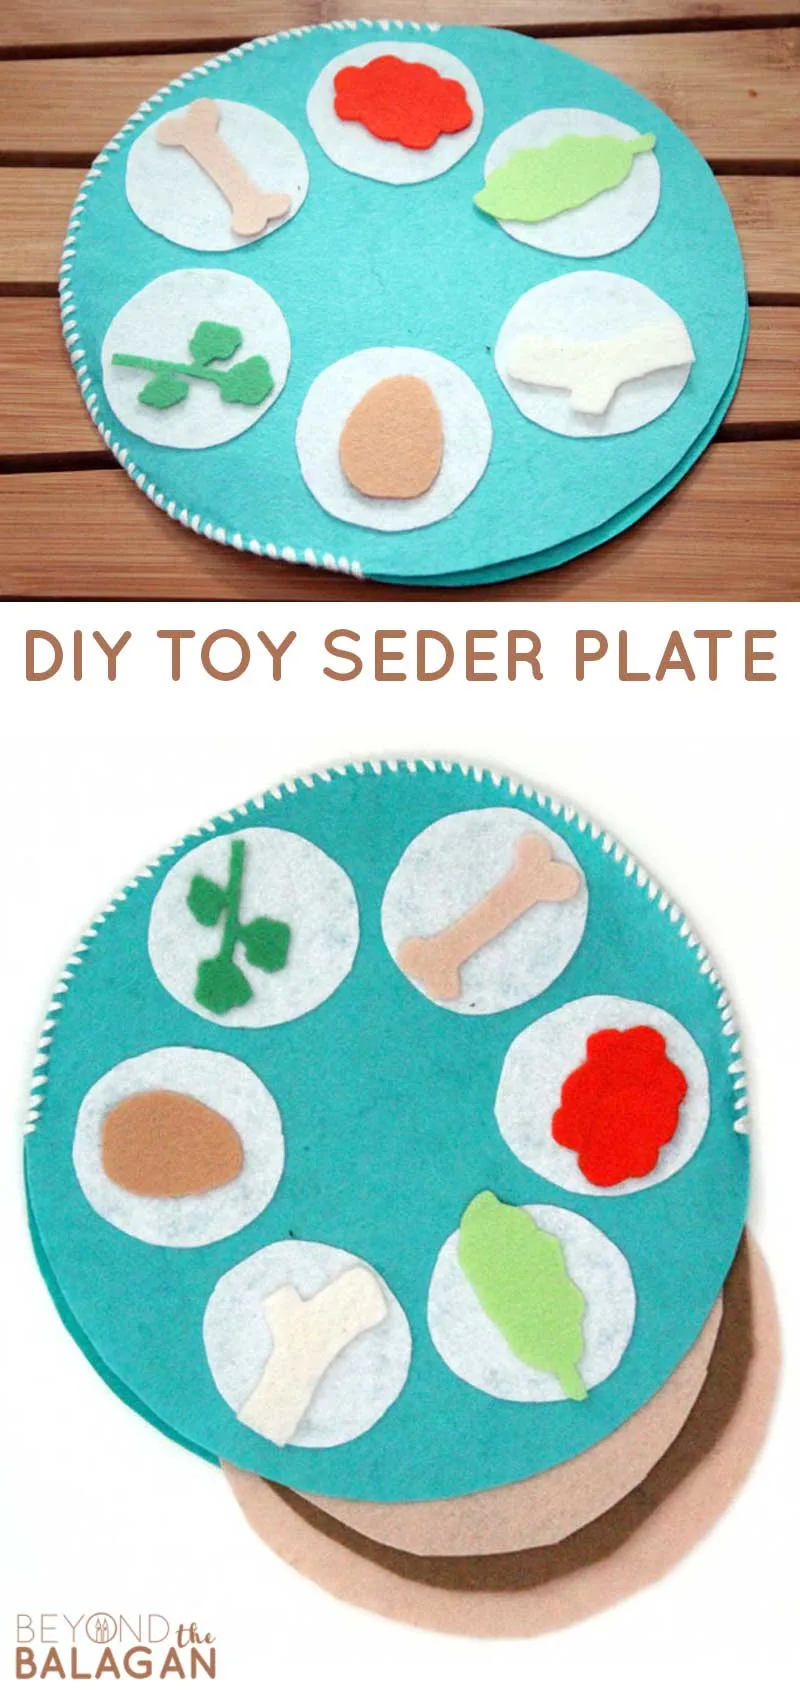 Make this really fun Pesach toy - a felt seder plate for passover. This Pesach craft is fun for toddlers to play with! #passover #pesach #beyondthebalagan